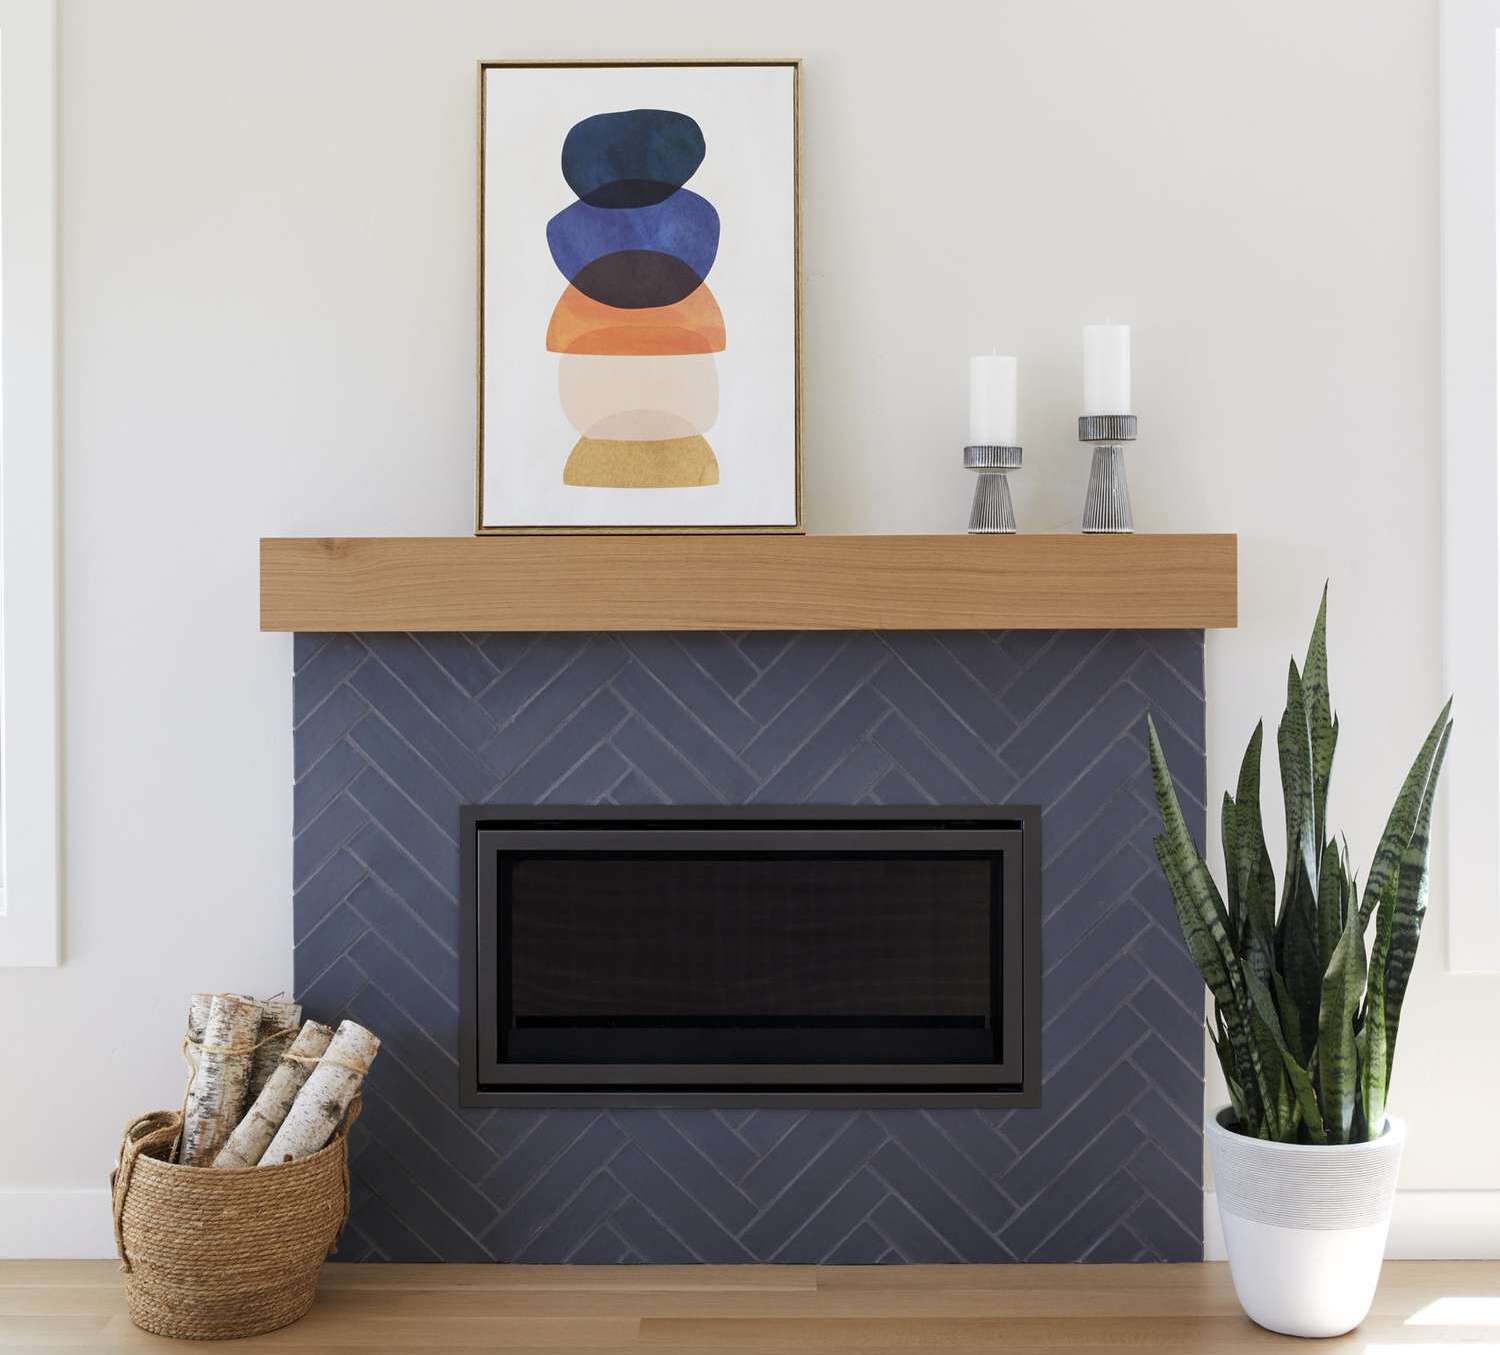 How To Update A Fireplace Mantel